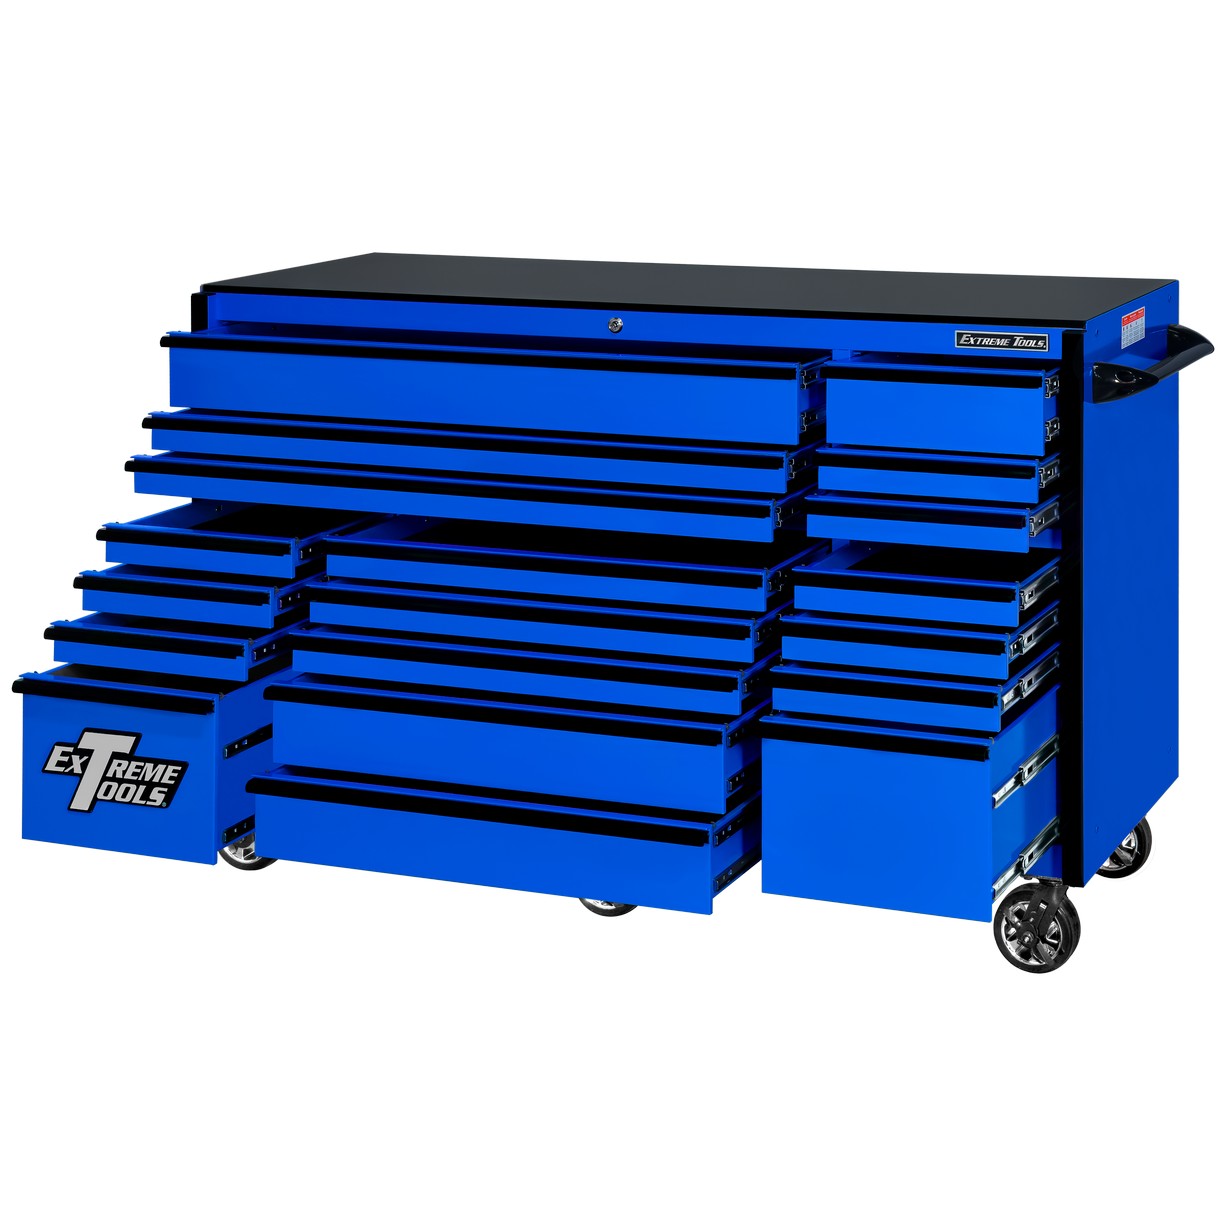 Extreme Tools RX Series 72Inch L x 30inch W 19 Drawer Tool Roller Cabinet - Blue